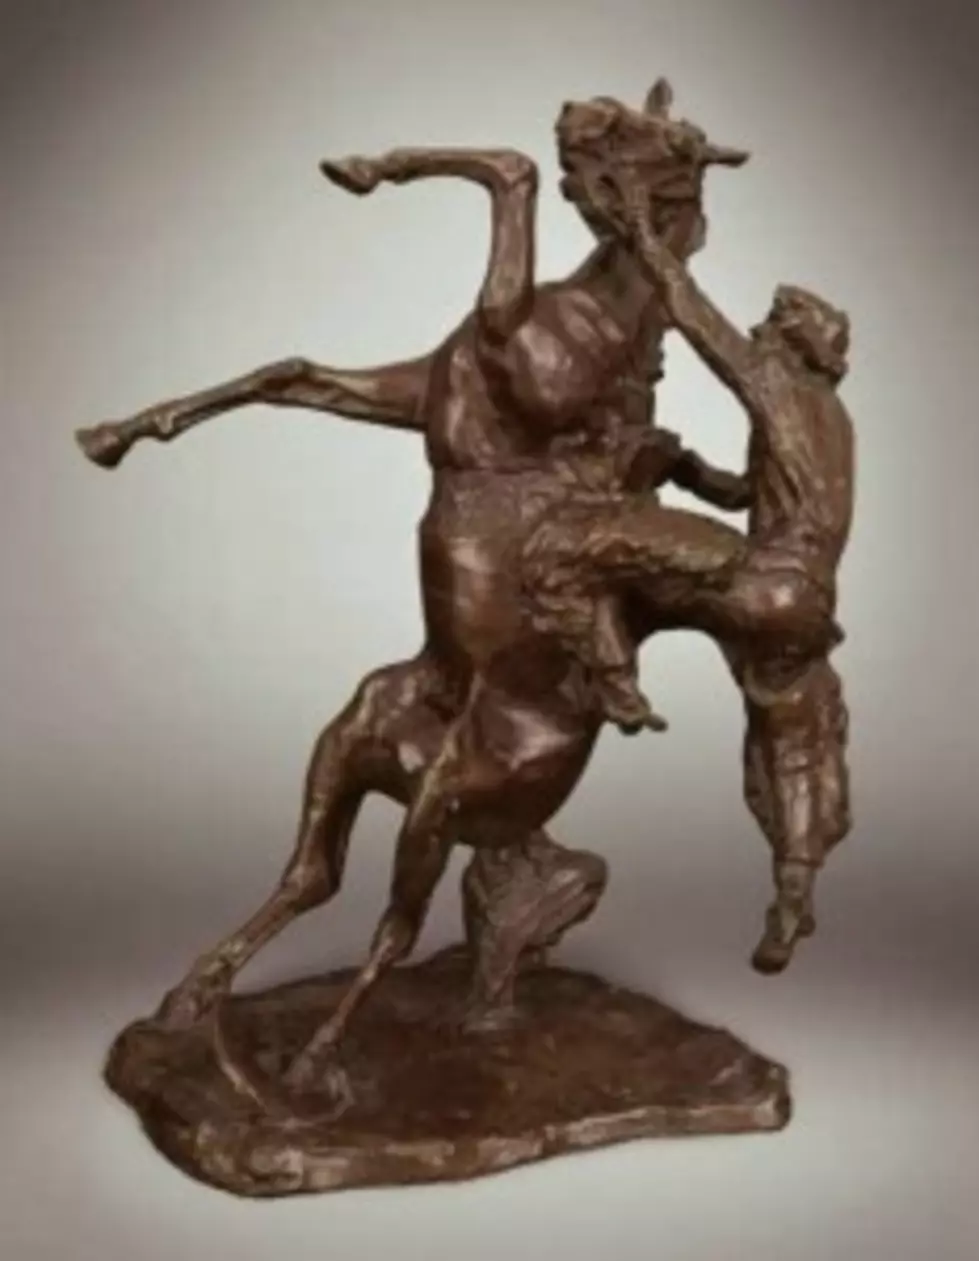 Notable Russell Bronze To be Auctioned at Museum Benefit